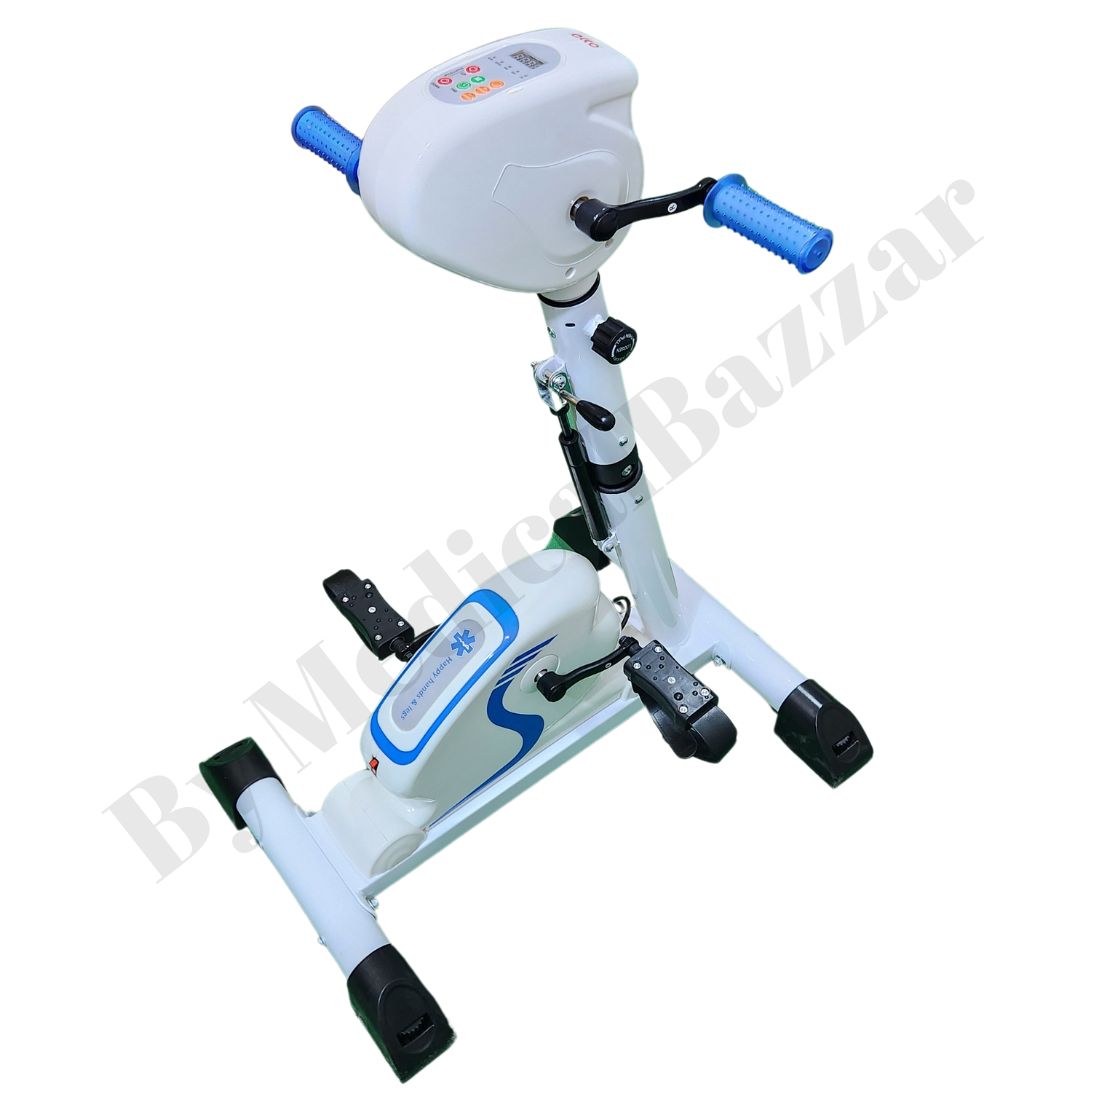 Automatic Rehab Trainer - Exercise Bike (Arm and Legs)